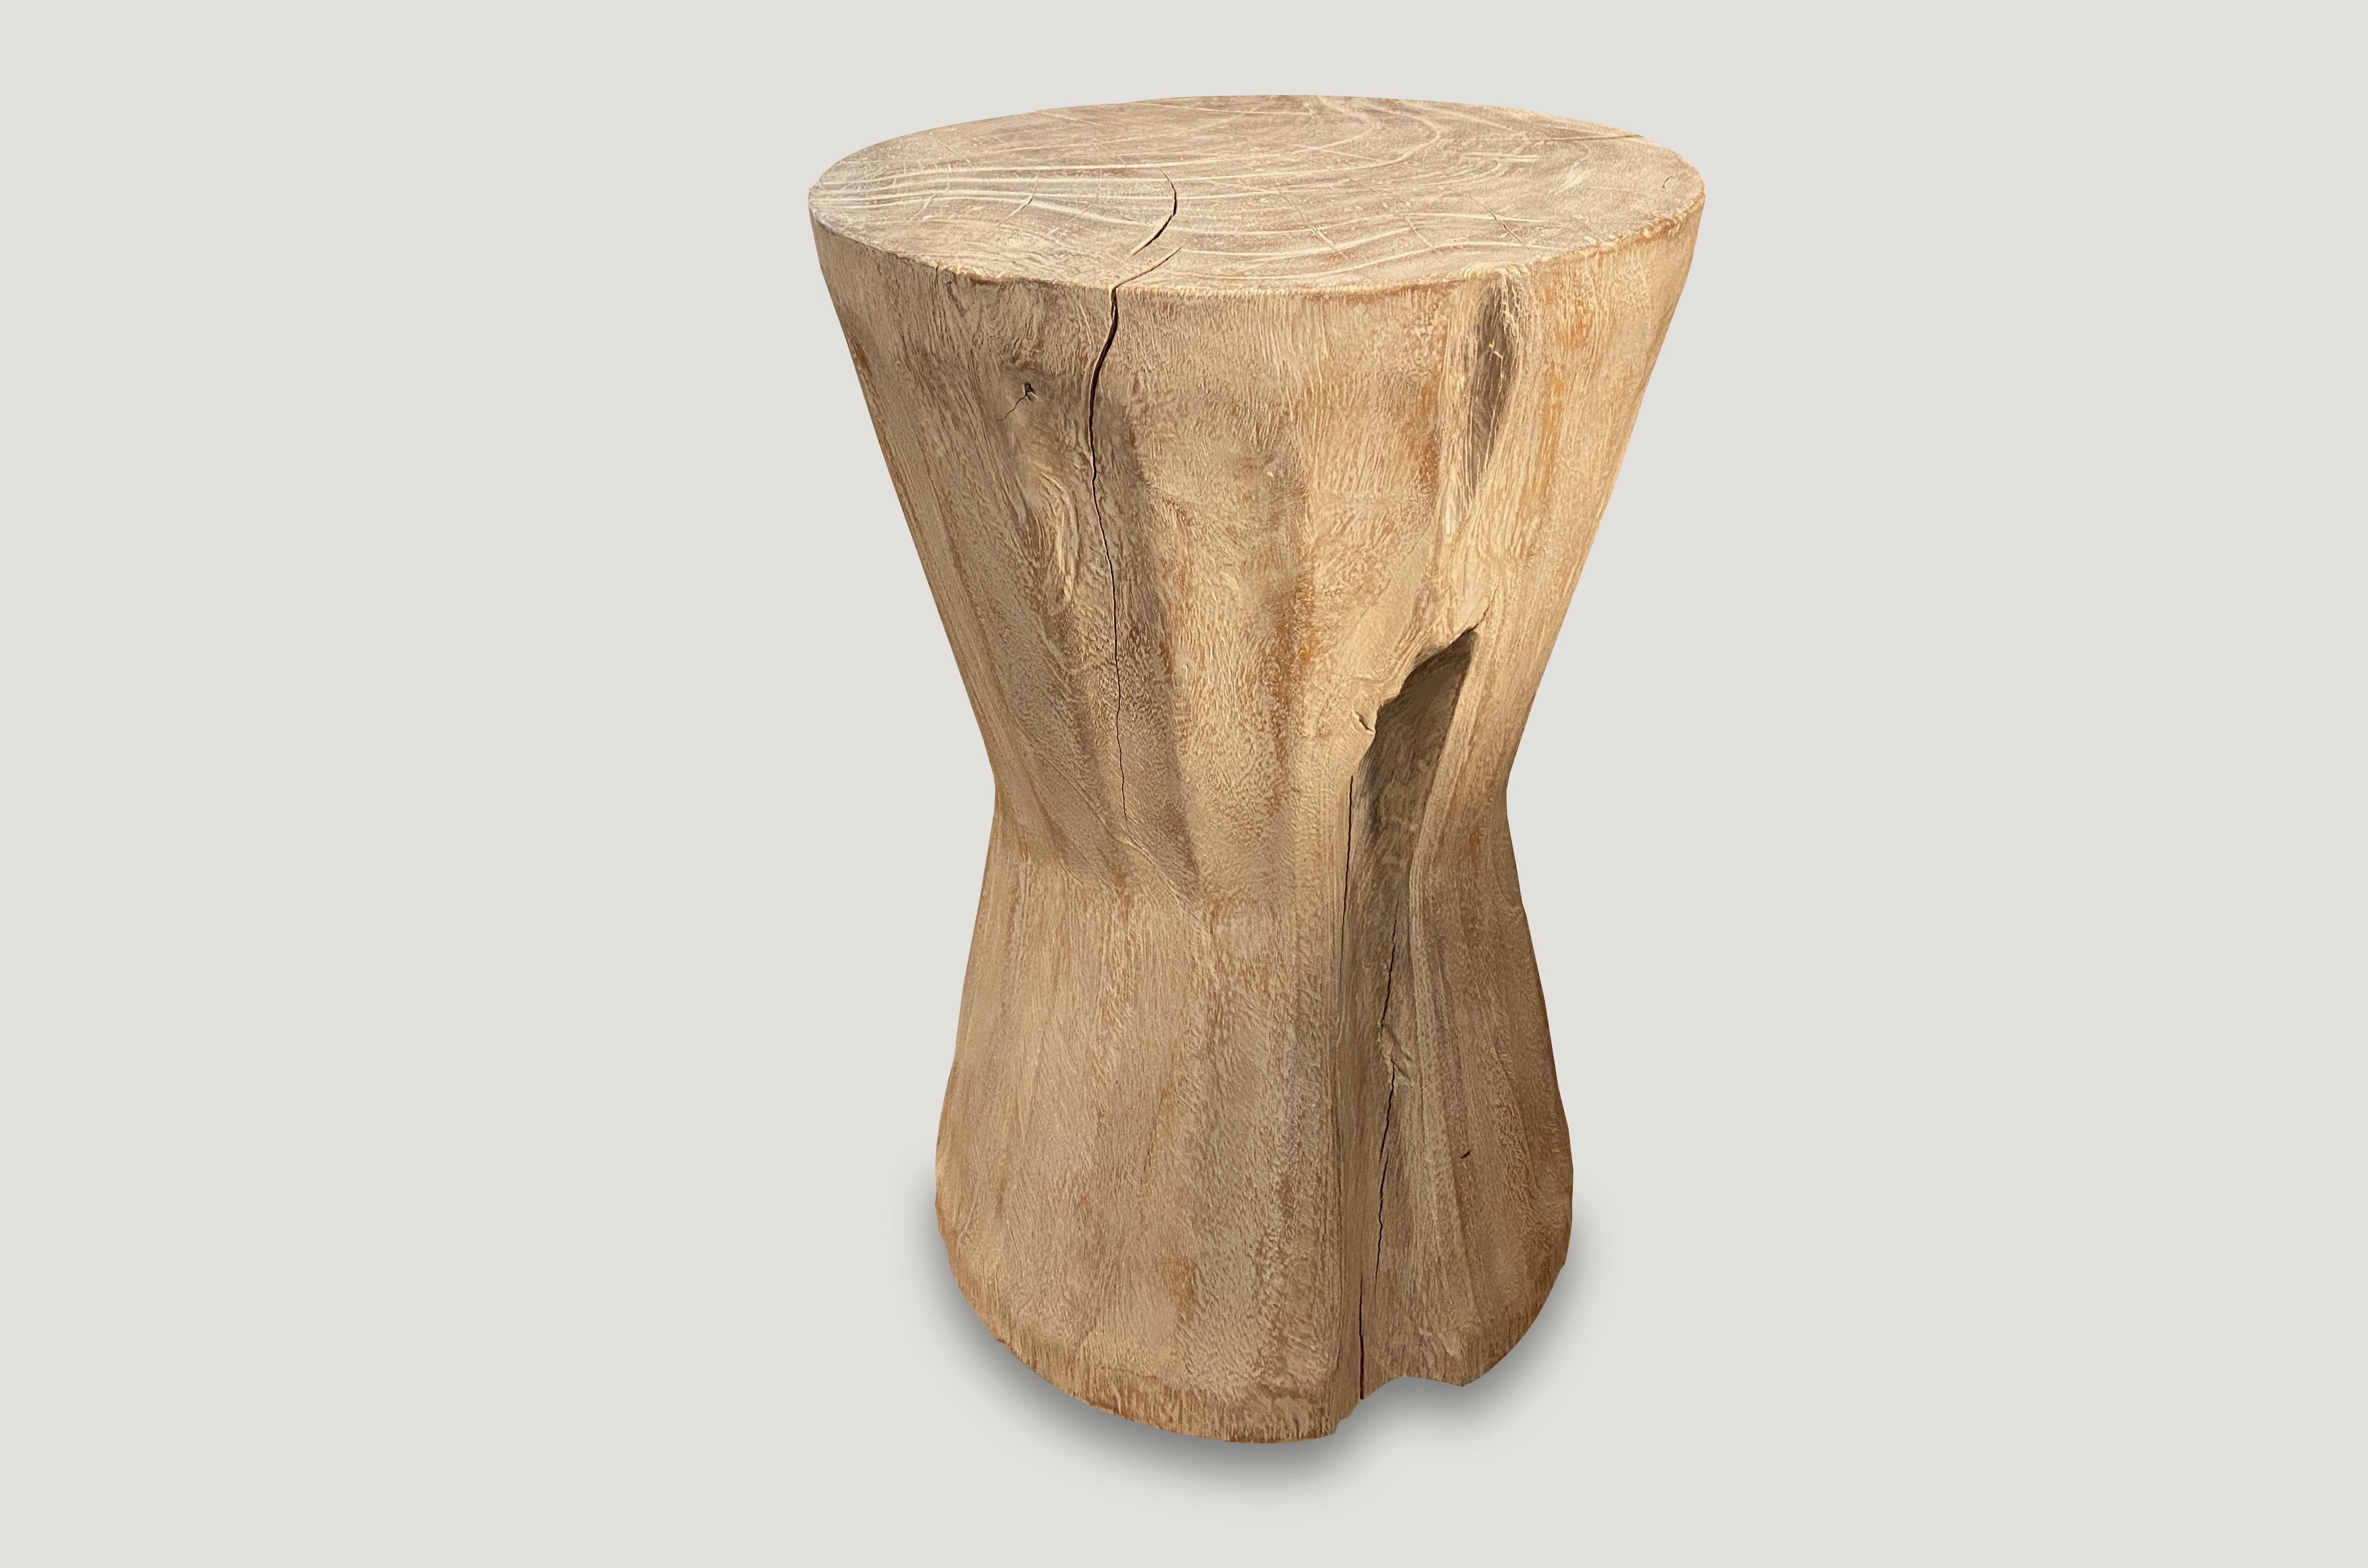 Hand carved bevelled side table or stool that celebrates cracks and crevices found in reclaimed teak wood. Please scroll down to the last image which we produced for 1Hotel Miami Beach. Perfect for inside or outside living.

Andrianna Shamaris.